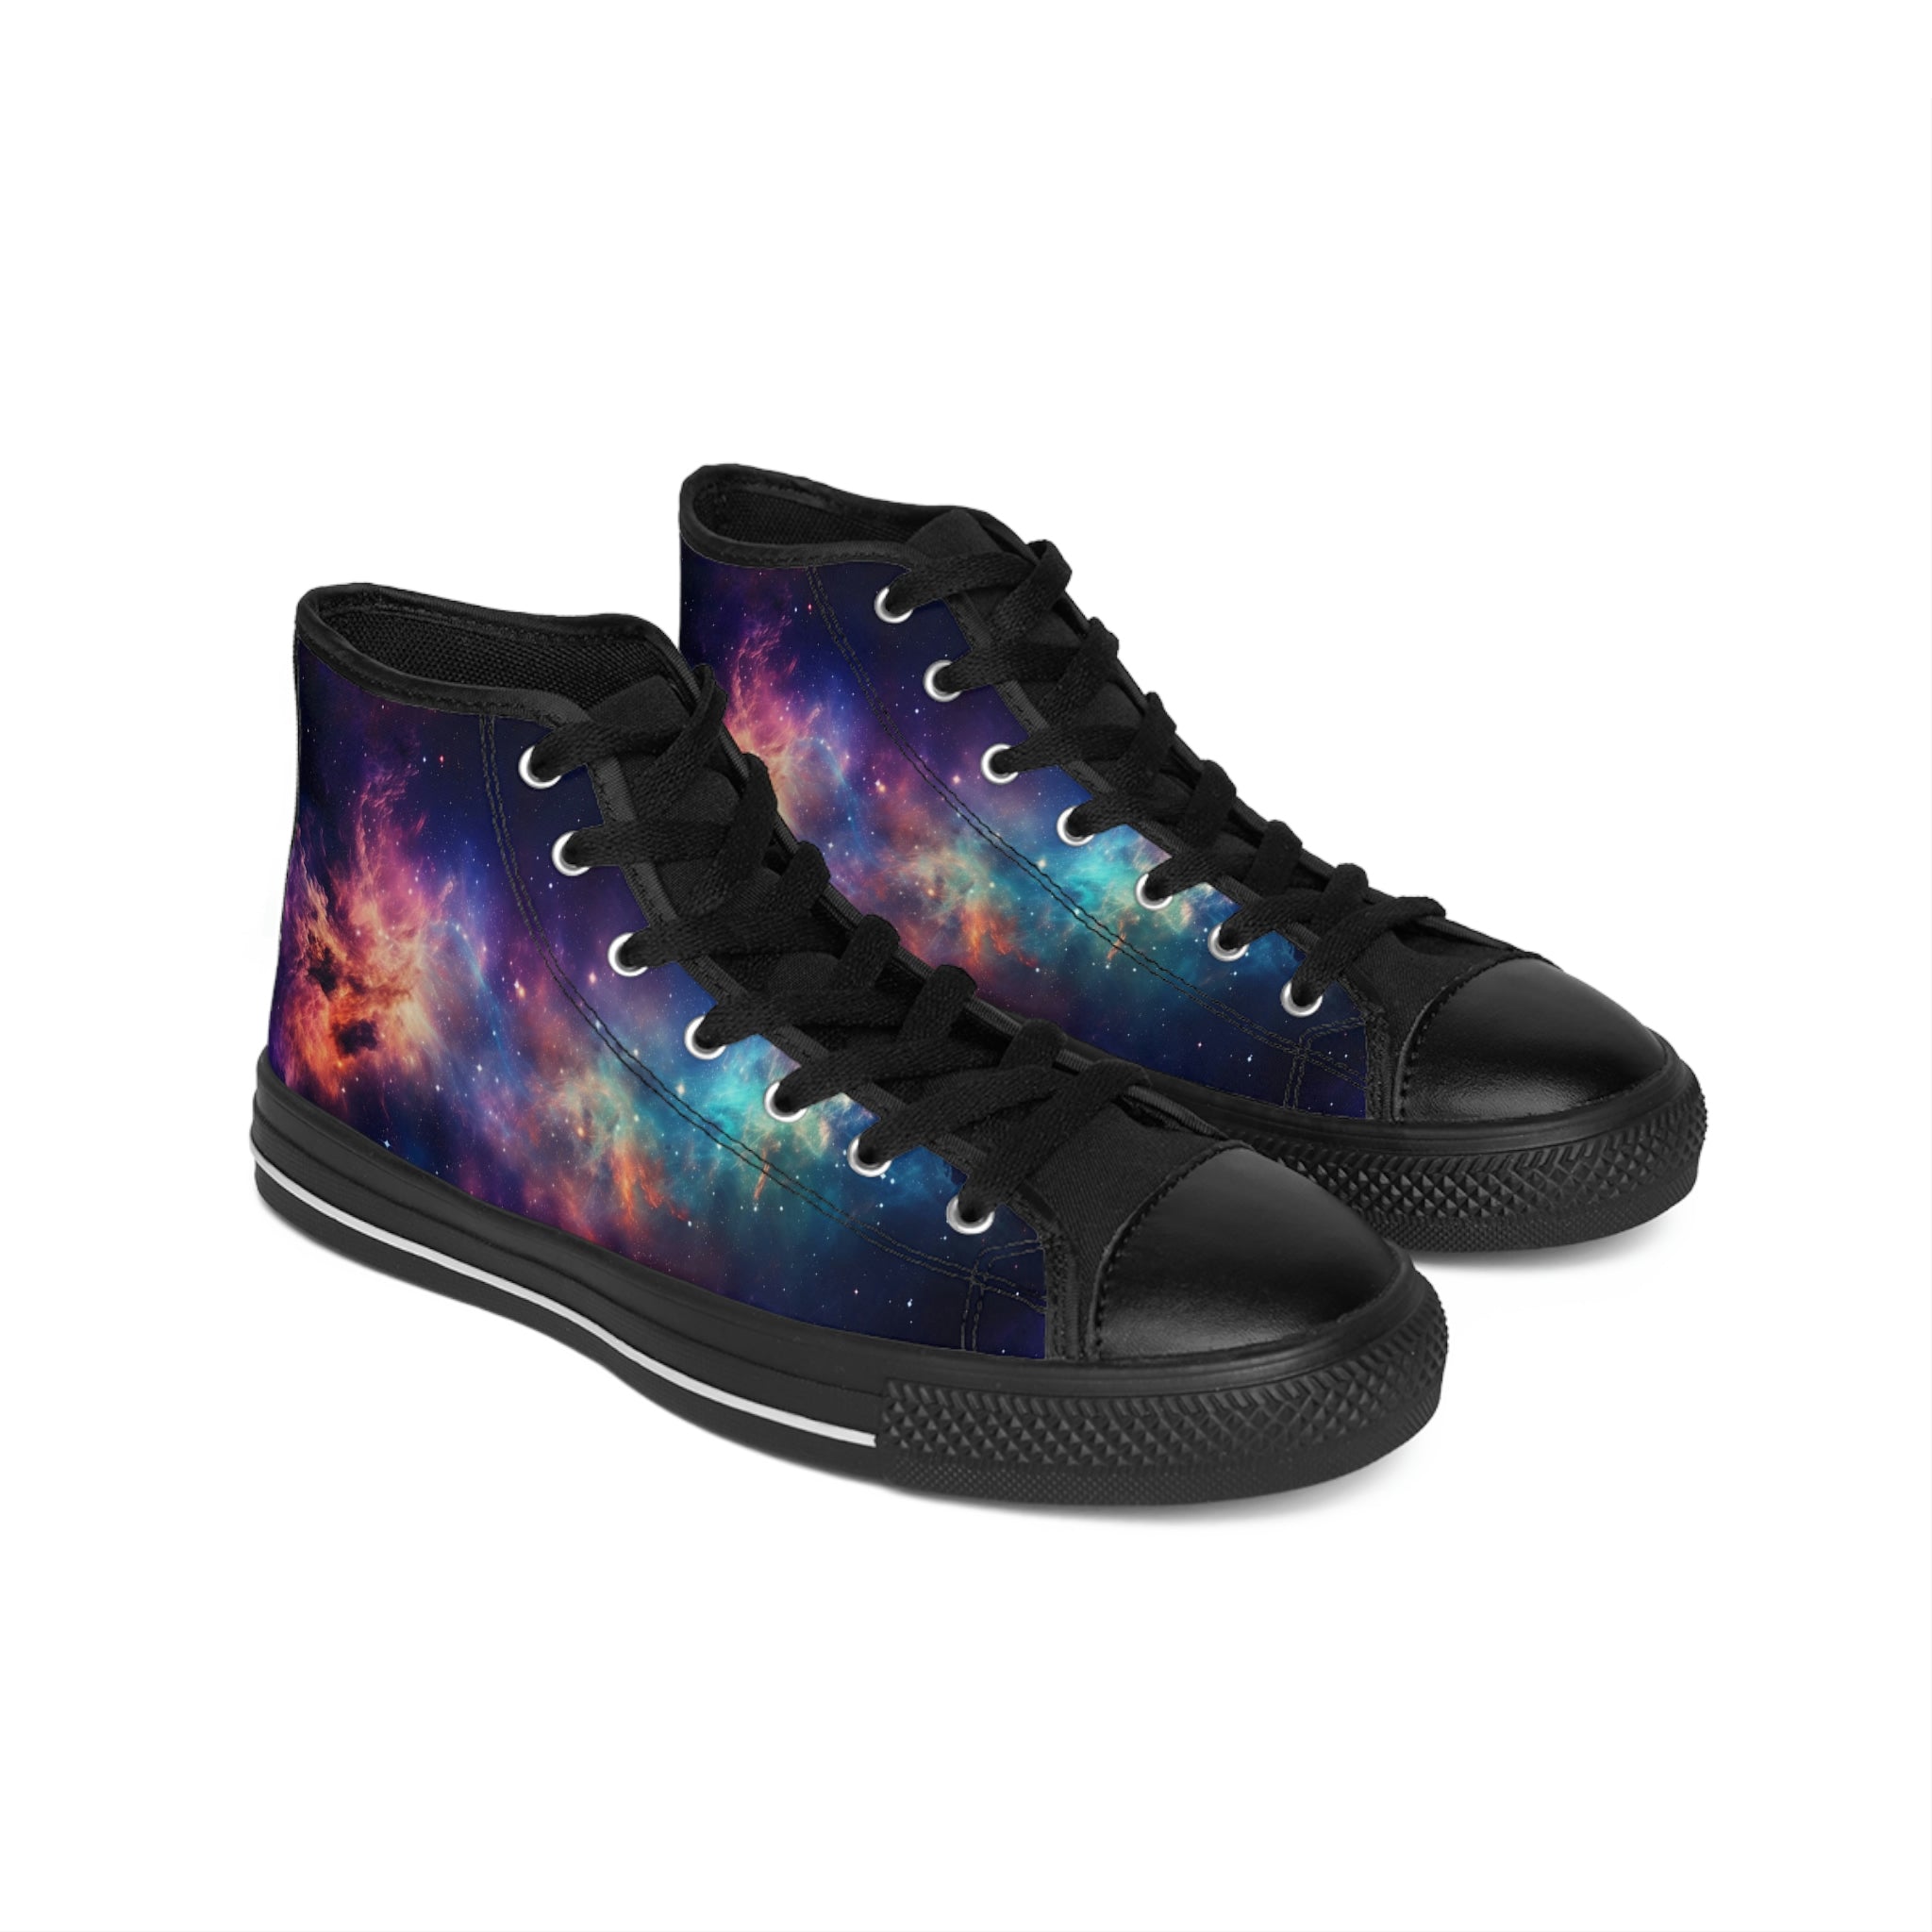 Men's Galactic Glimmer Shoes